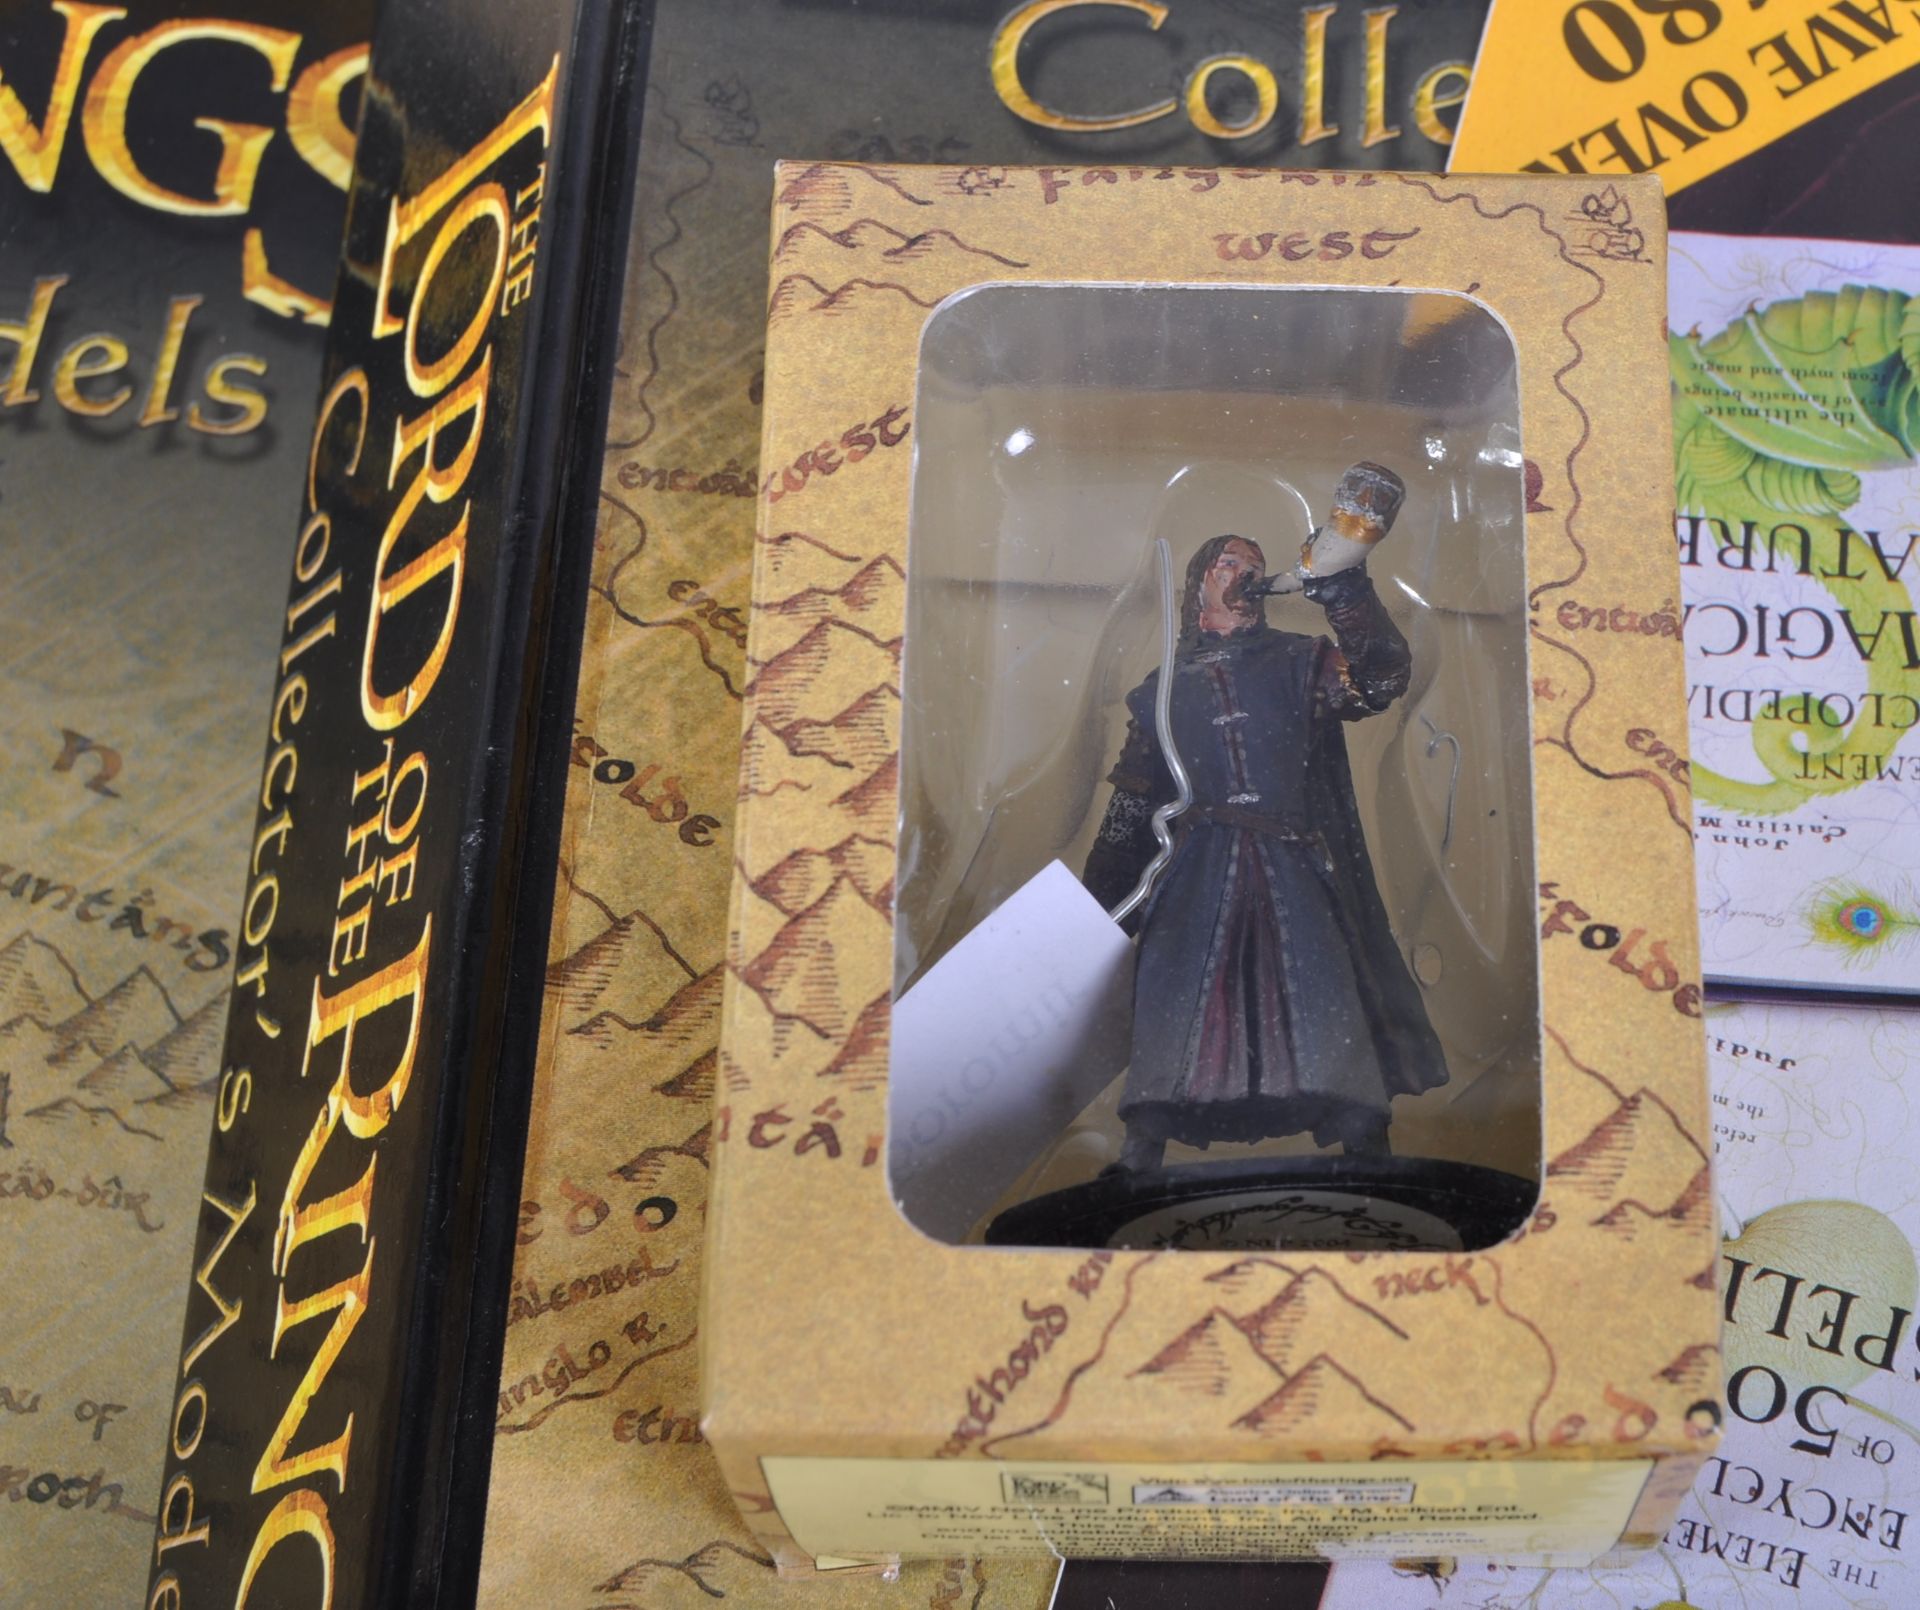 THE LORD OF THE RINGS - EAGLEMOSS - COLLECTOR'S MODELS - Image 4 of 8